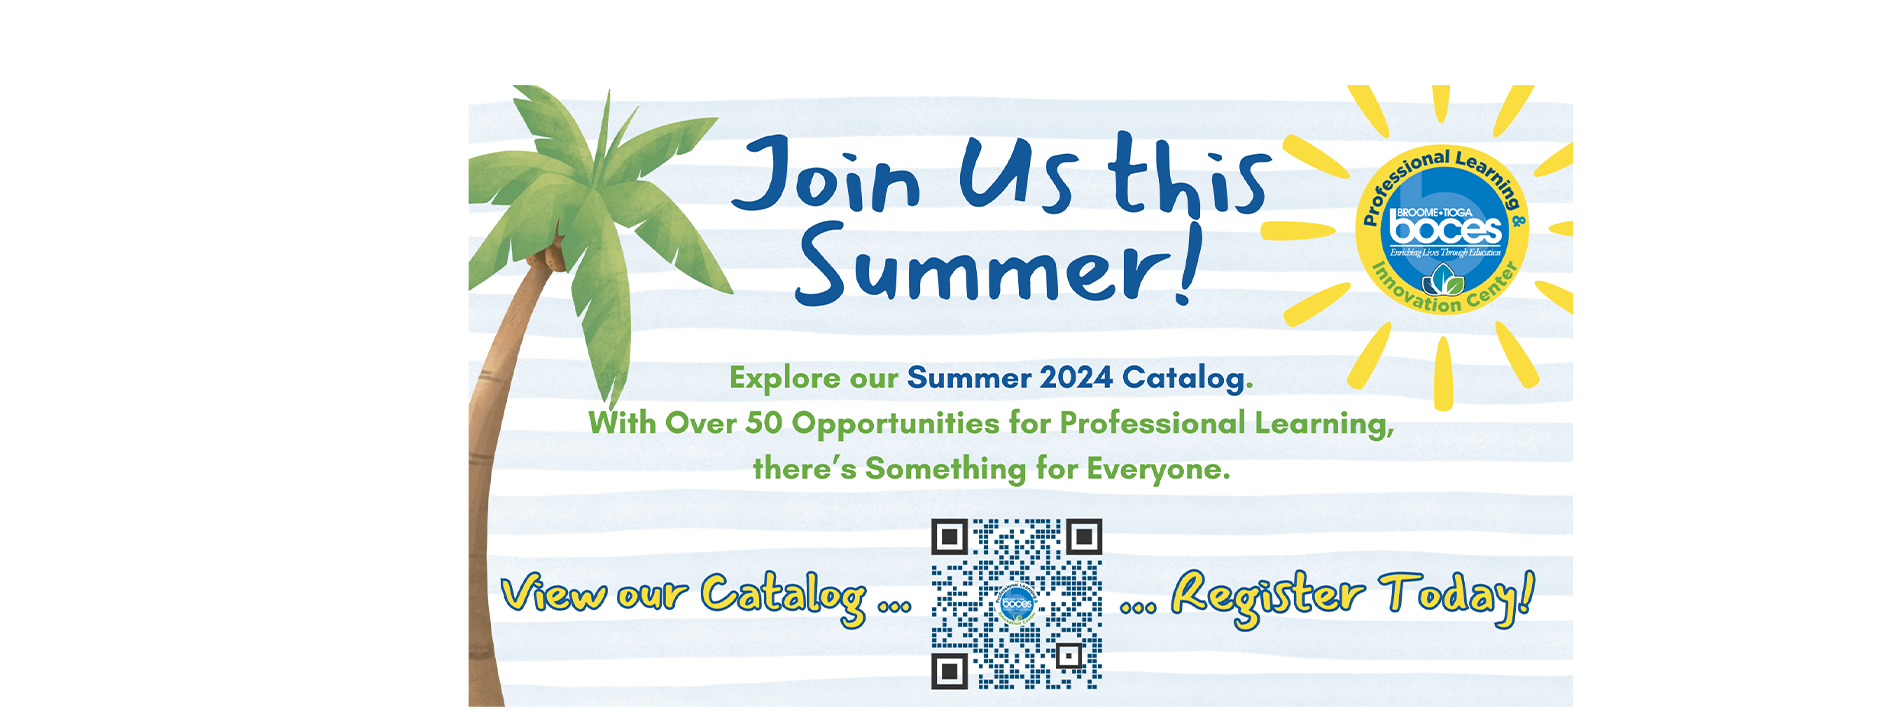 Join Us this Summer! Explore our Summer 2024 Catalog. With Over 50 Opportunities for Professional Learning, there&#39;s Something for Everyone. View our Catalog ... Register Today!